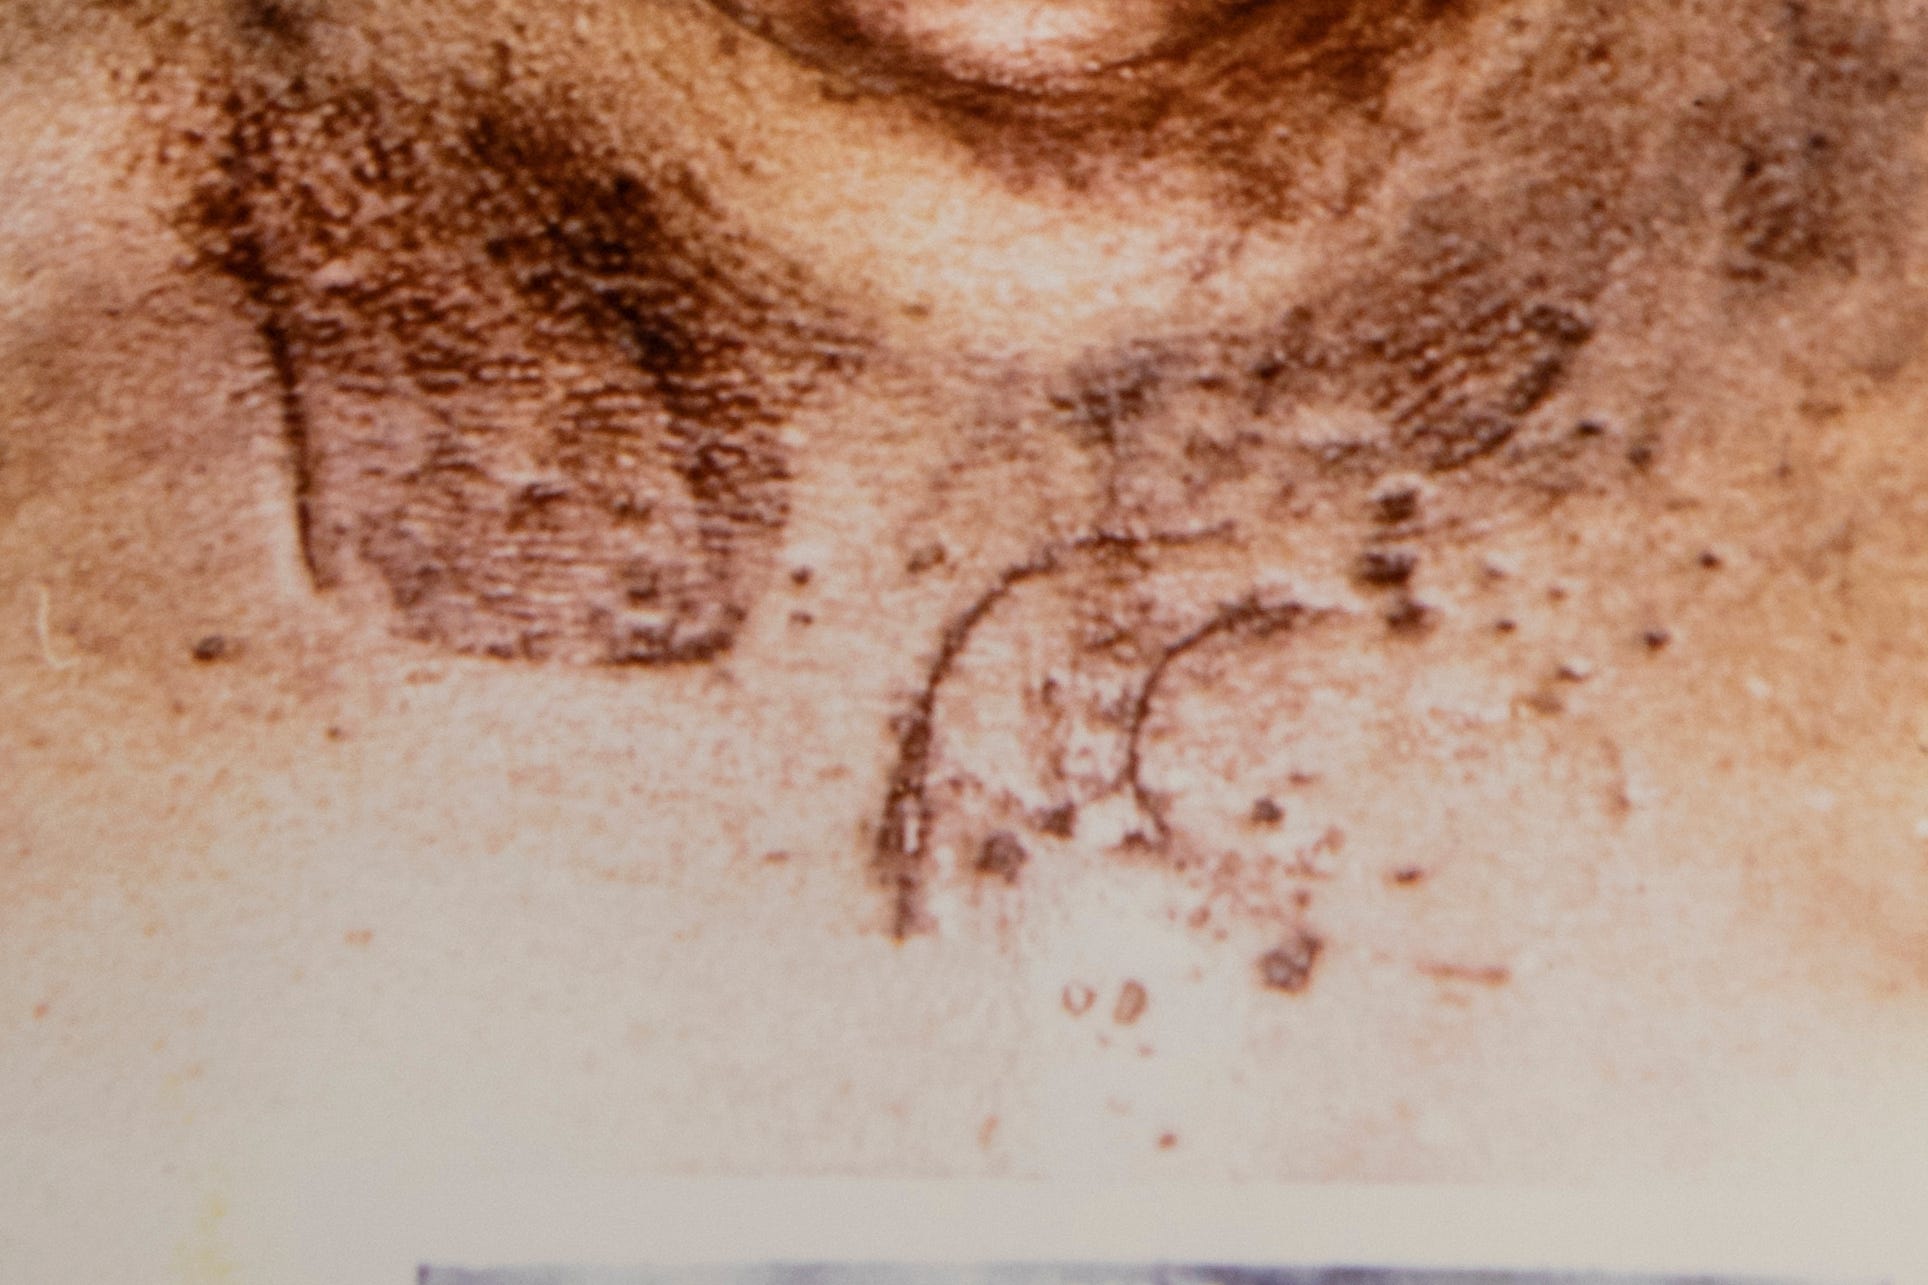 Evidence photos of Rhoda Nathan show bruises and markings from where she was beaten to death. Police argued that the markings could have been from Elwood Jones's walkie-talkie.